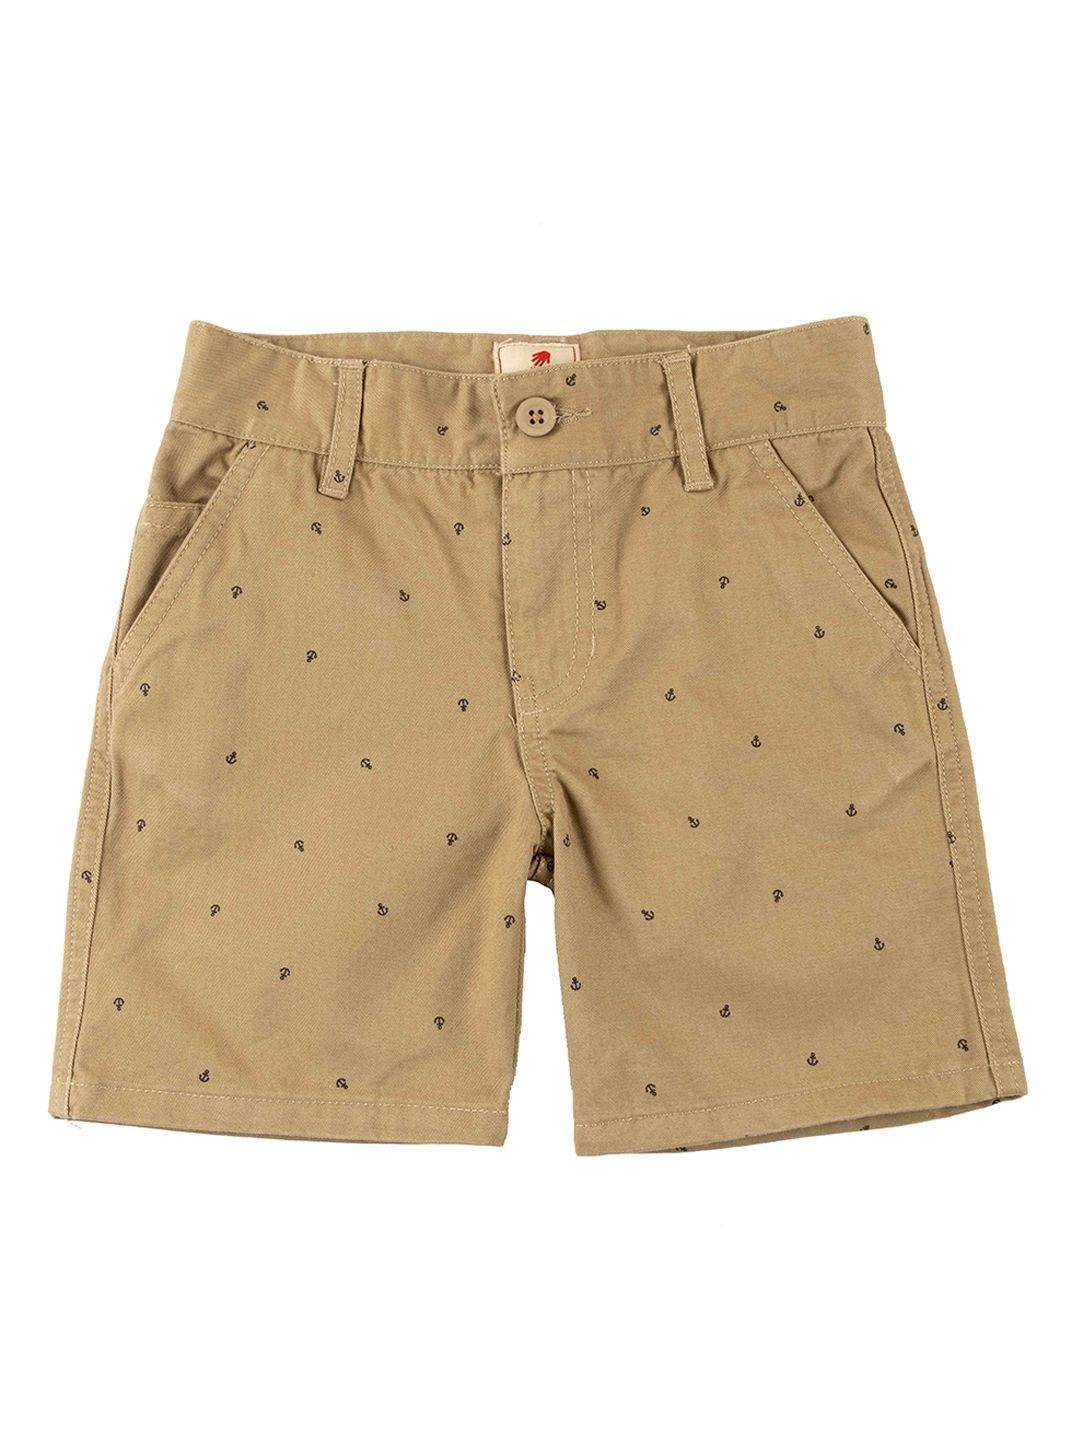 juscubs boys beige cotton printed outdoor shorts